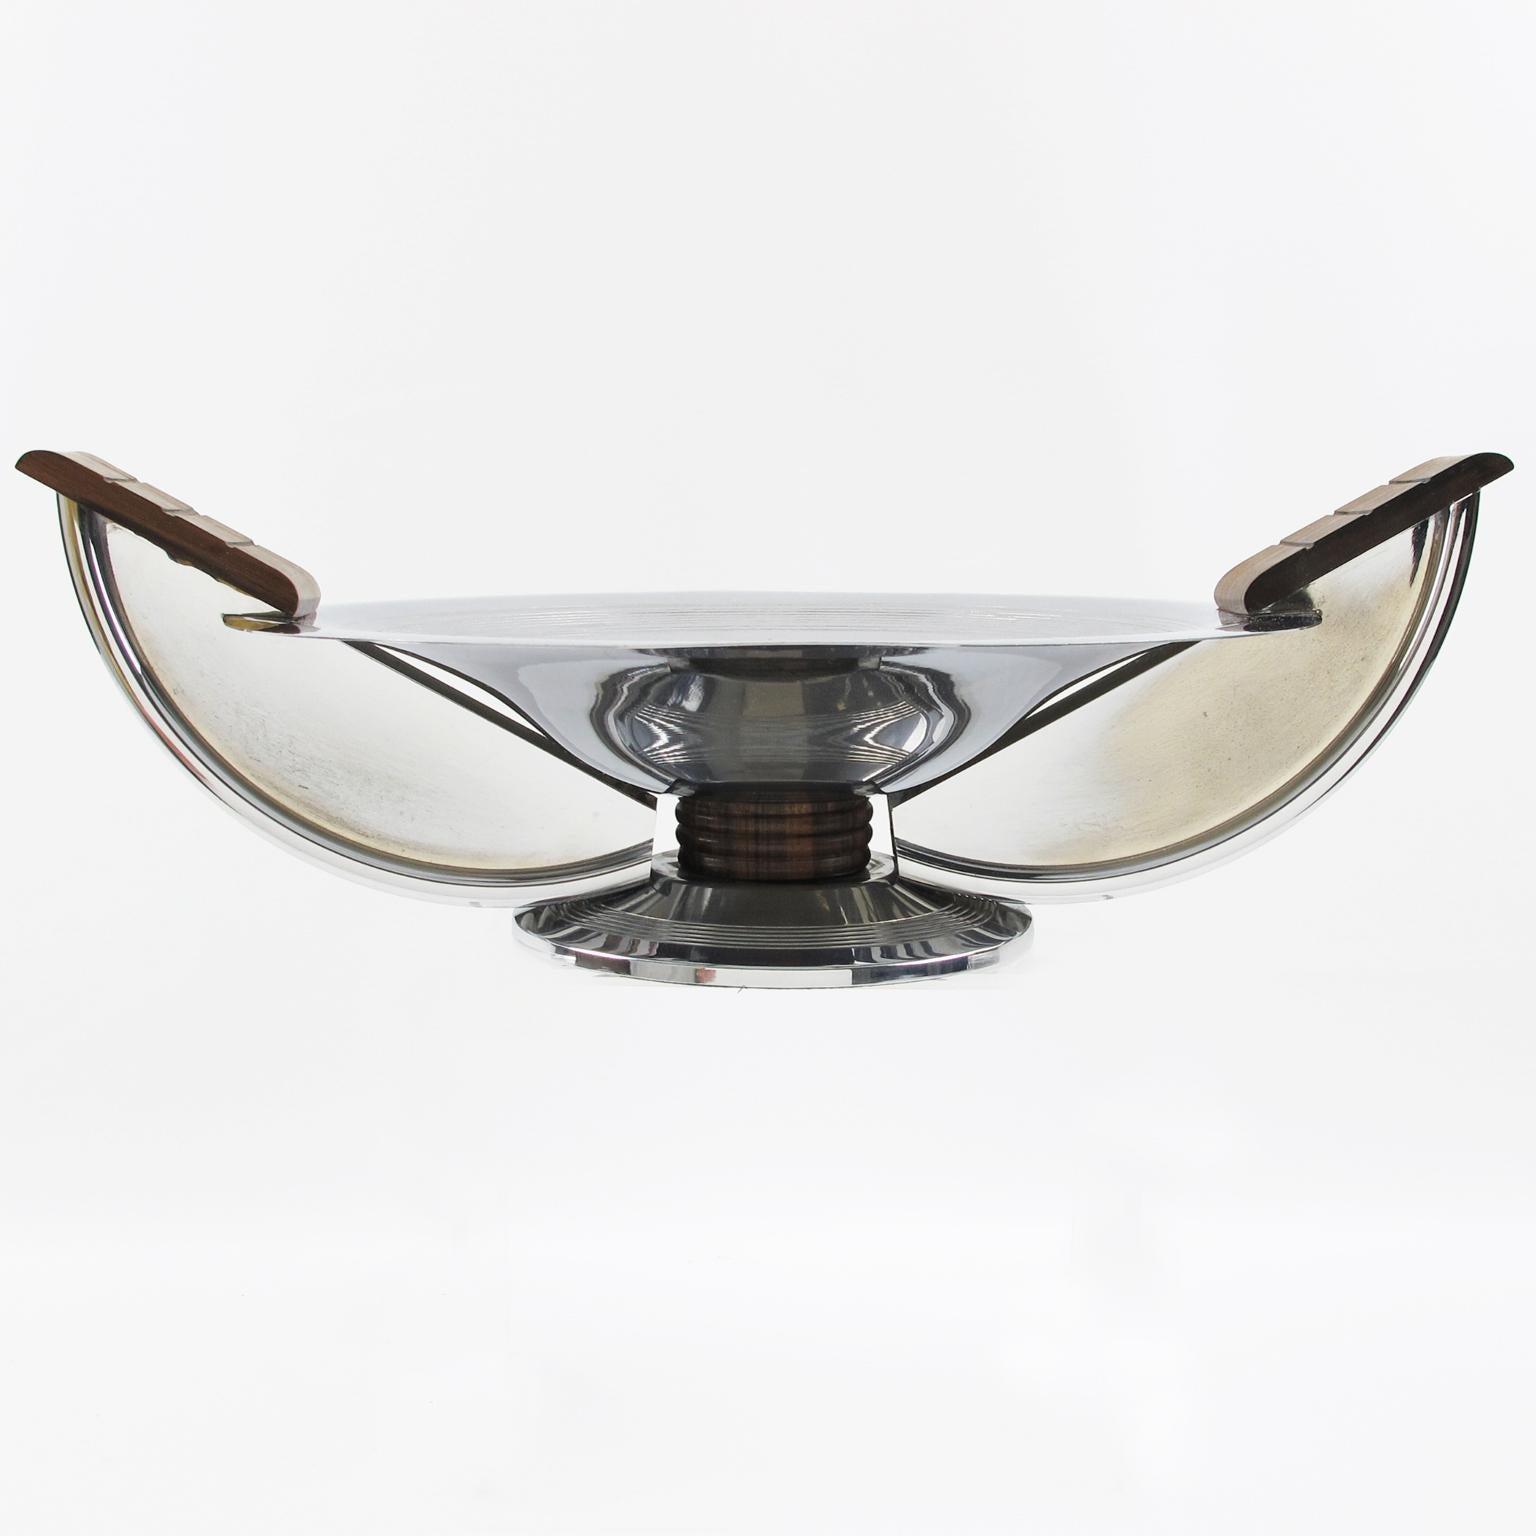 French Art Deco Chrome and Macassar Wood Centerpiece Decorative Bowl, France 1930s